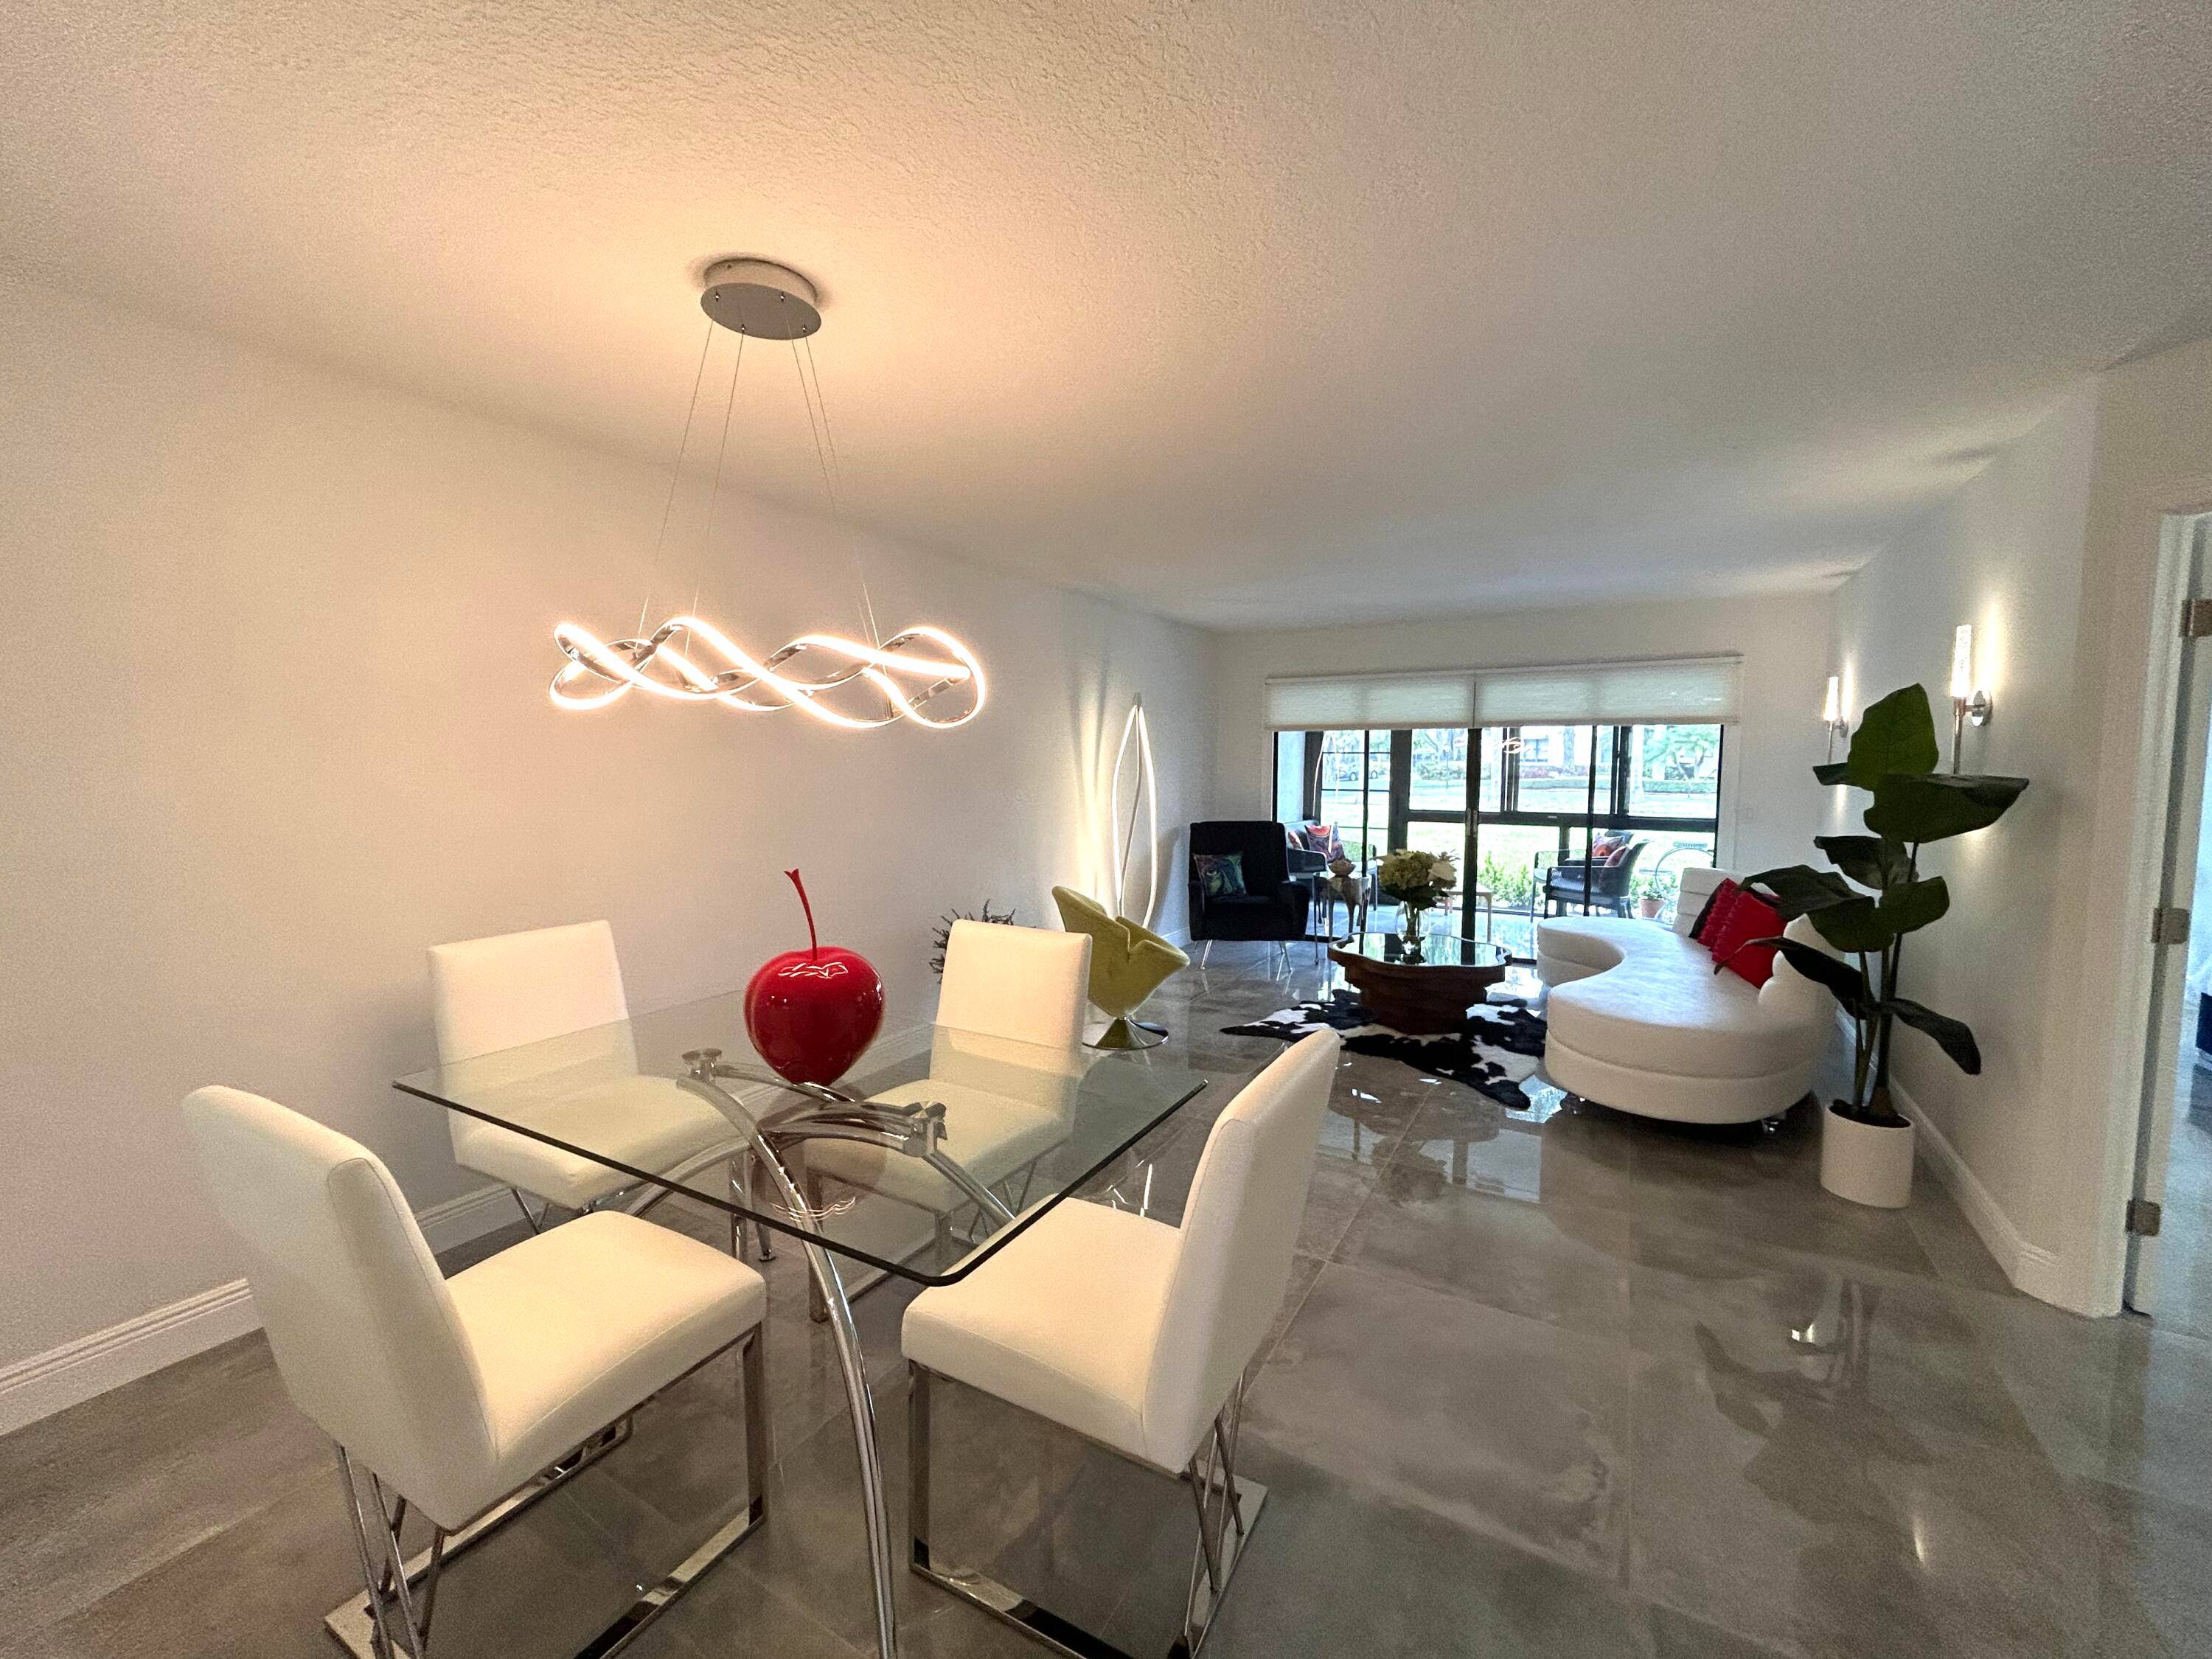 Meticulously renovated from floor to ceiling, This 2 bed 2 bath, 1st floor condo has 36 inch tiles throughout, filled with natural light and feels exceptionally open and airy.